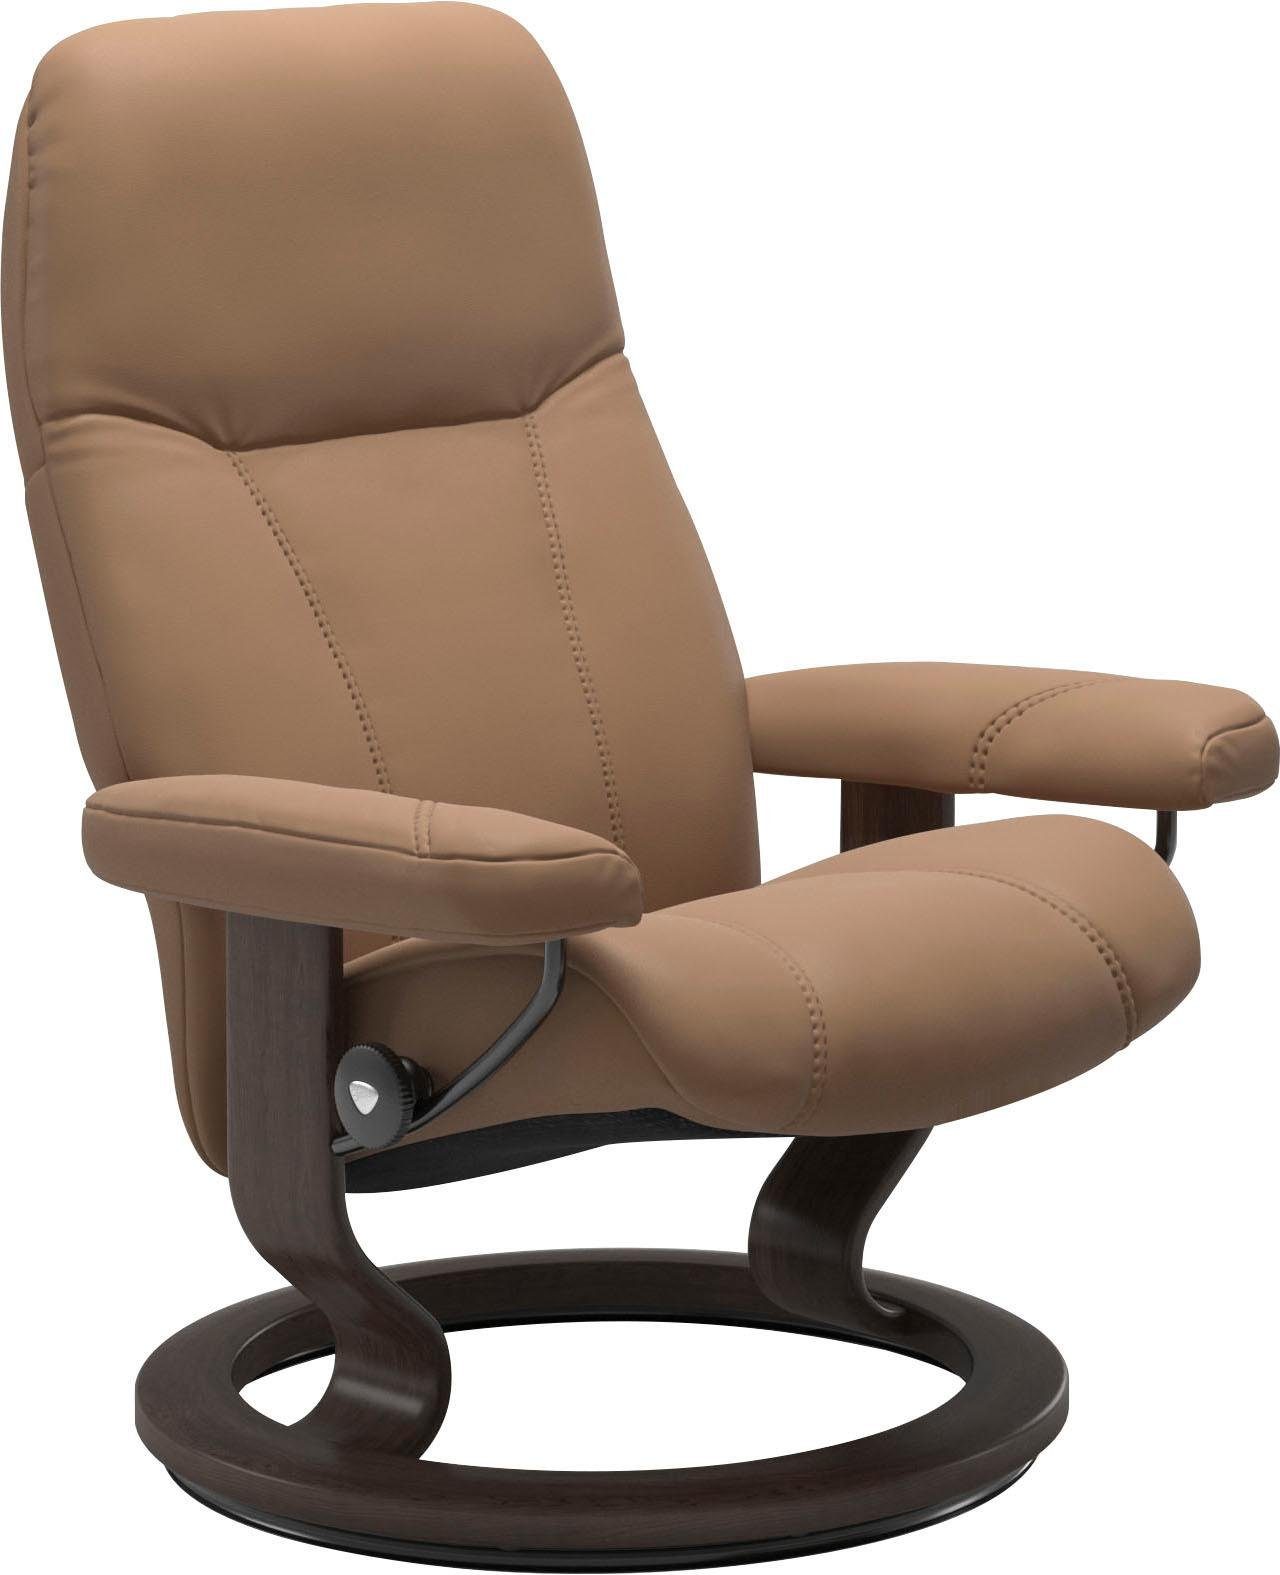 Stressless® Relaxsessel Consul, mit Classic Gestell Wenge M, Base, Größe